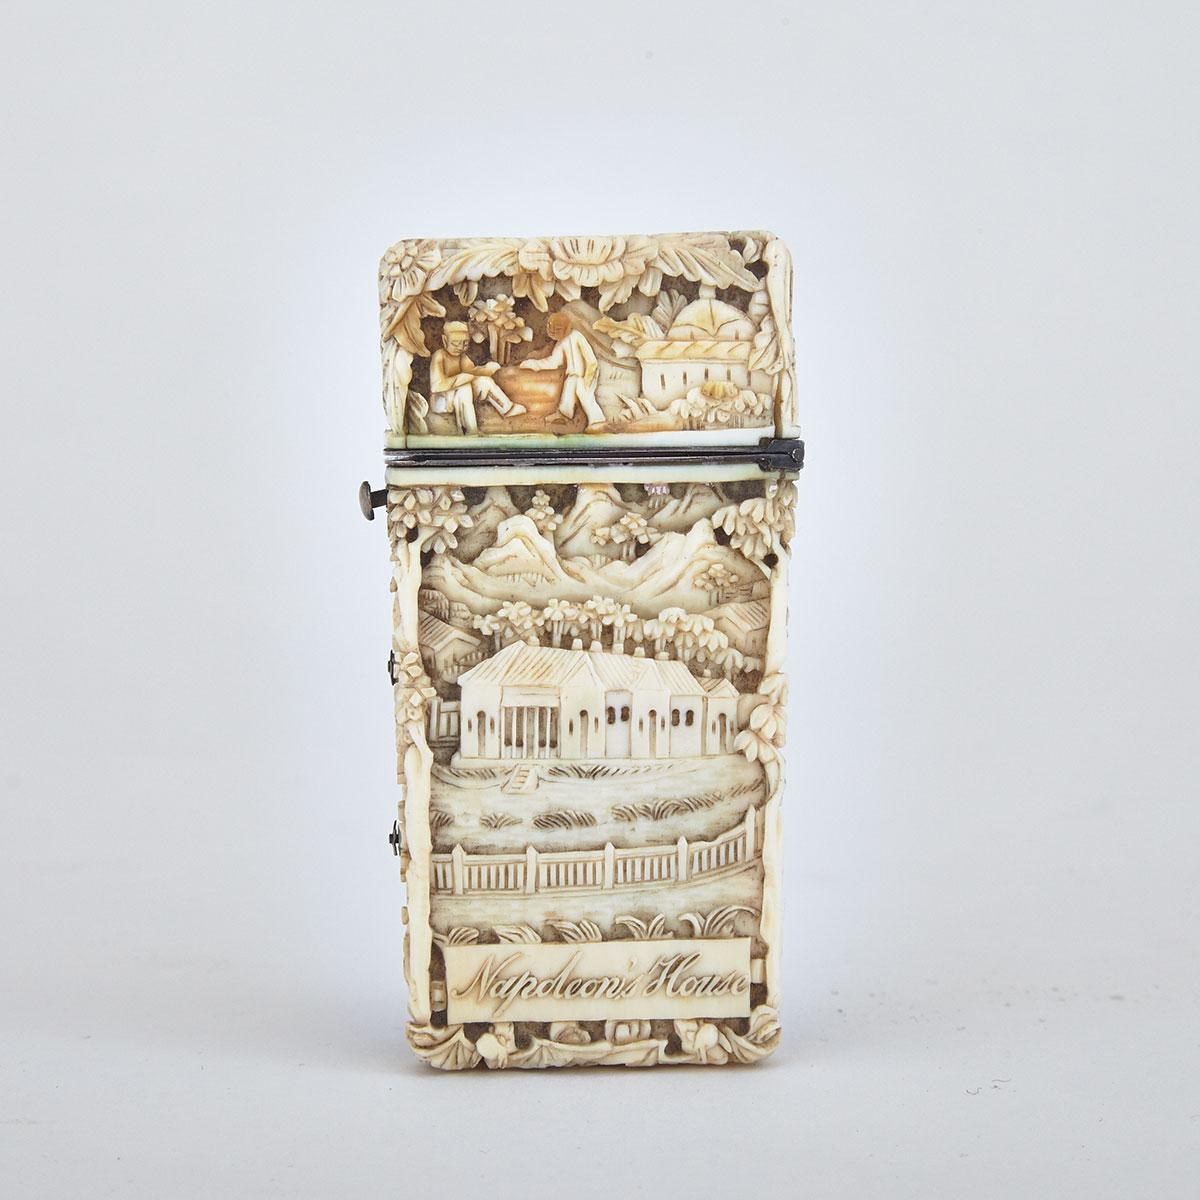 Chinese Export Silver Mounted Carved Ivory Lancet Case of Napoleonic Interest, 1st half, 19th century